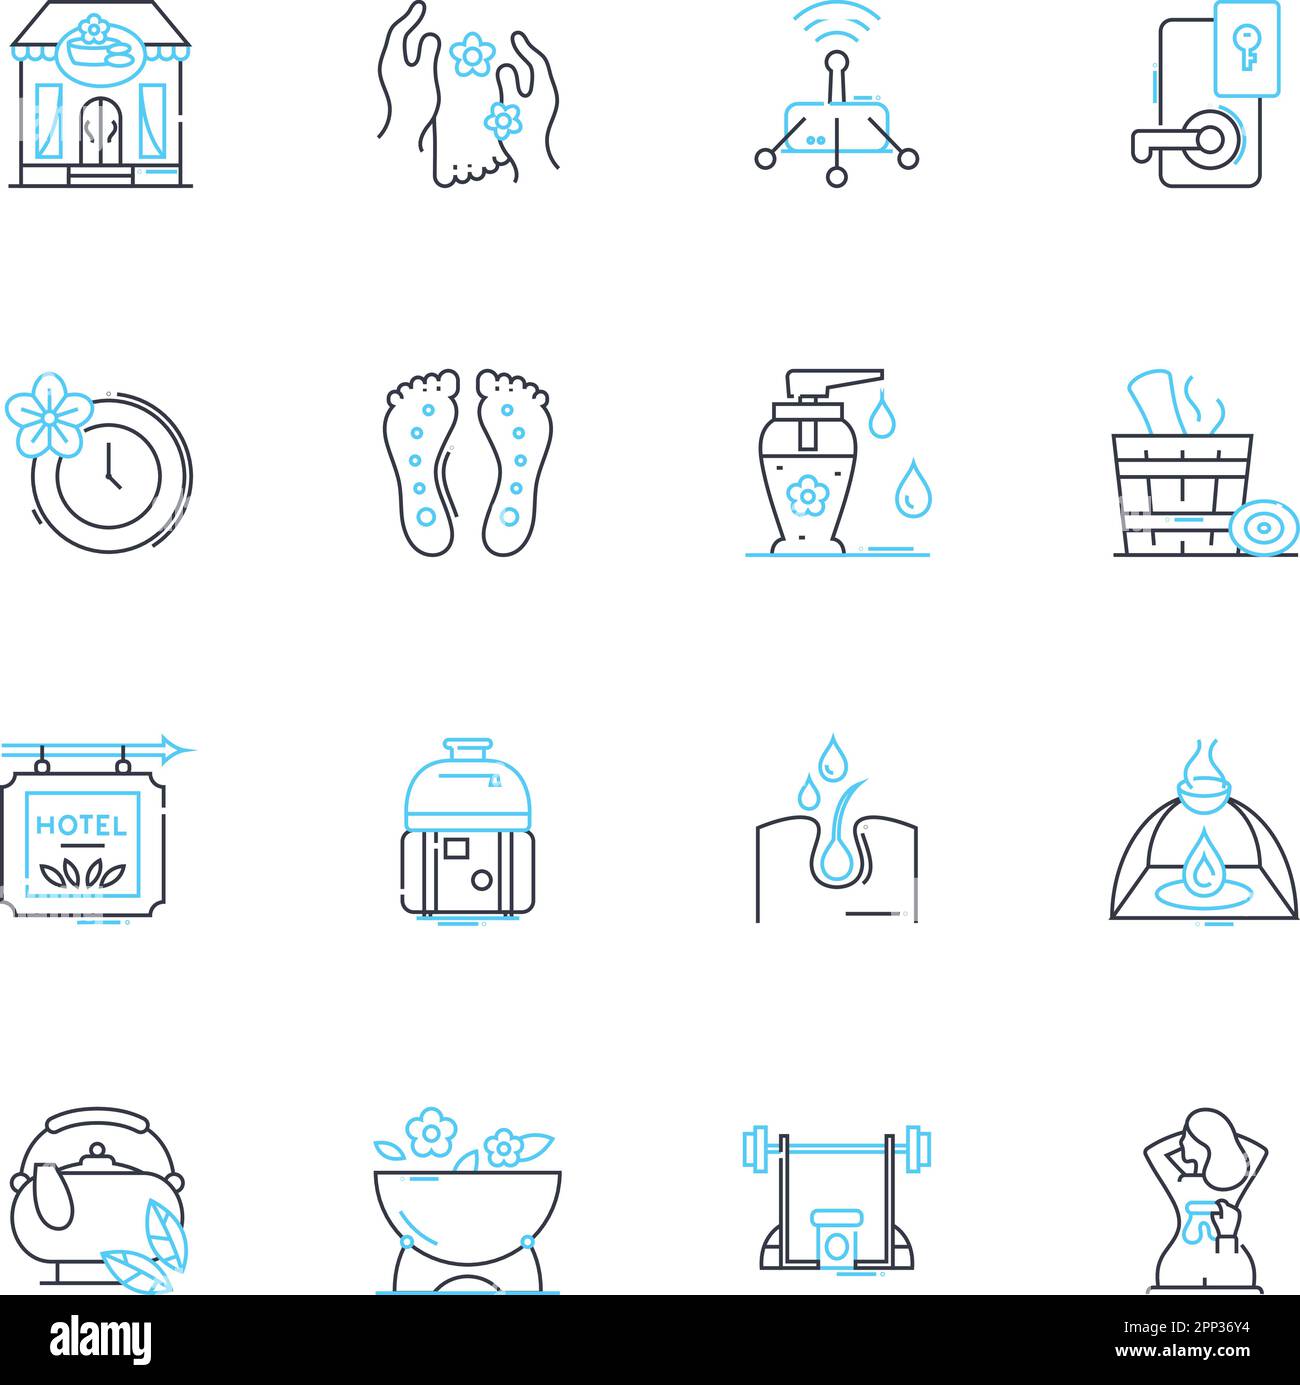 massage therapy linear icons set. Relaxation, Tension, Knots, Pressure, Stress, Sleeptime, Circulation line vector and concept signs. Wellness Stock Vector